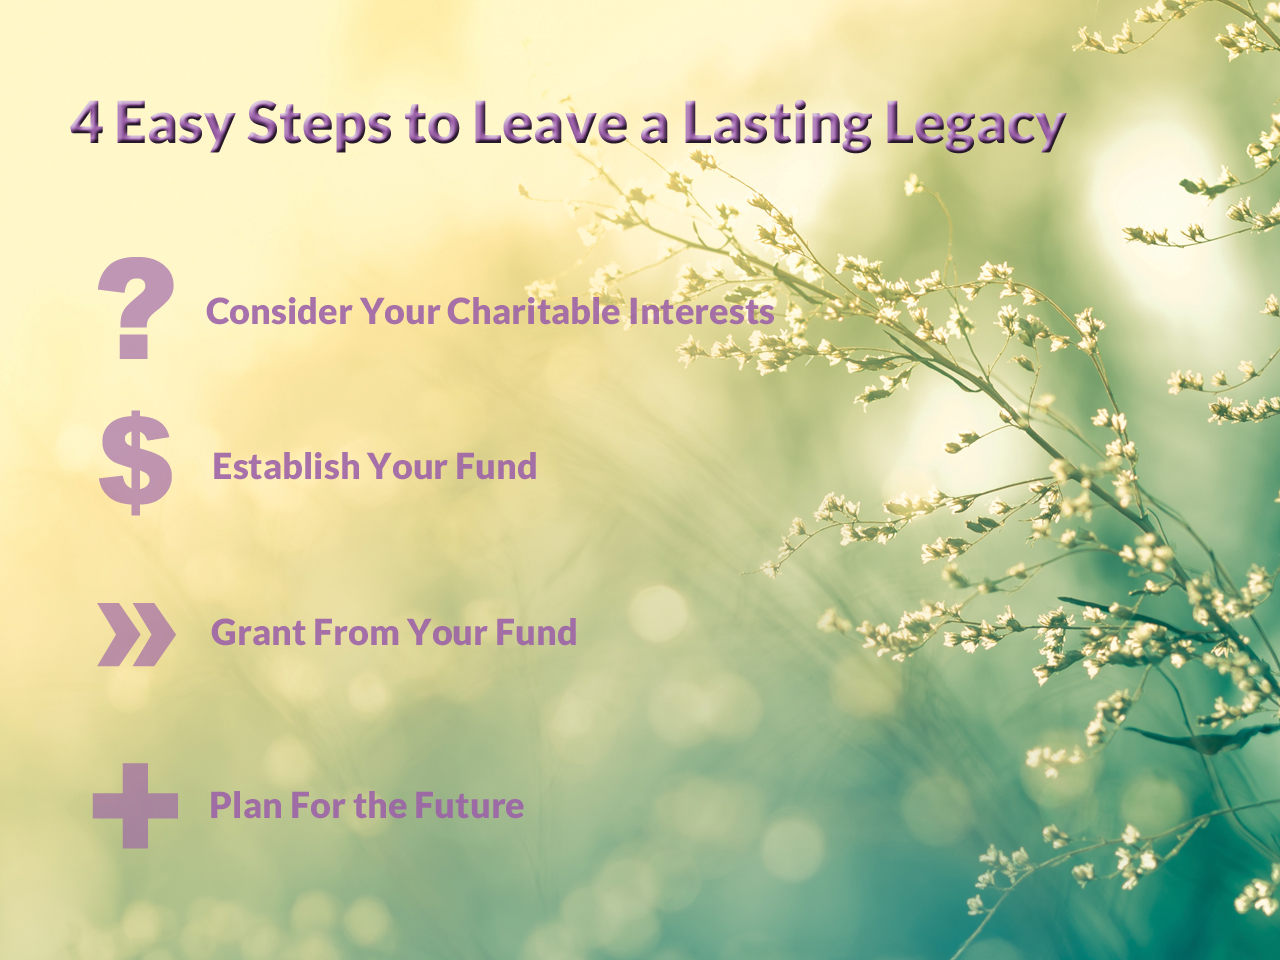 Text reads "Four easy steps to leave a lasting legacy: Consider your charitable interests, establish your fund, grant from your fund, plan for the future"